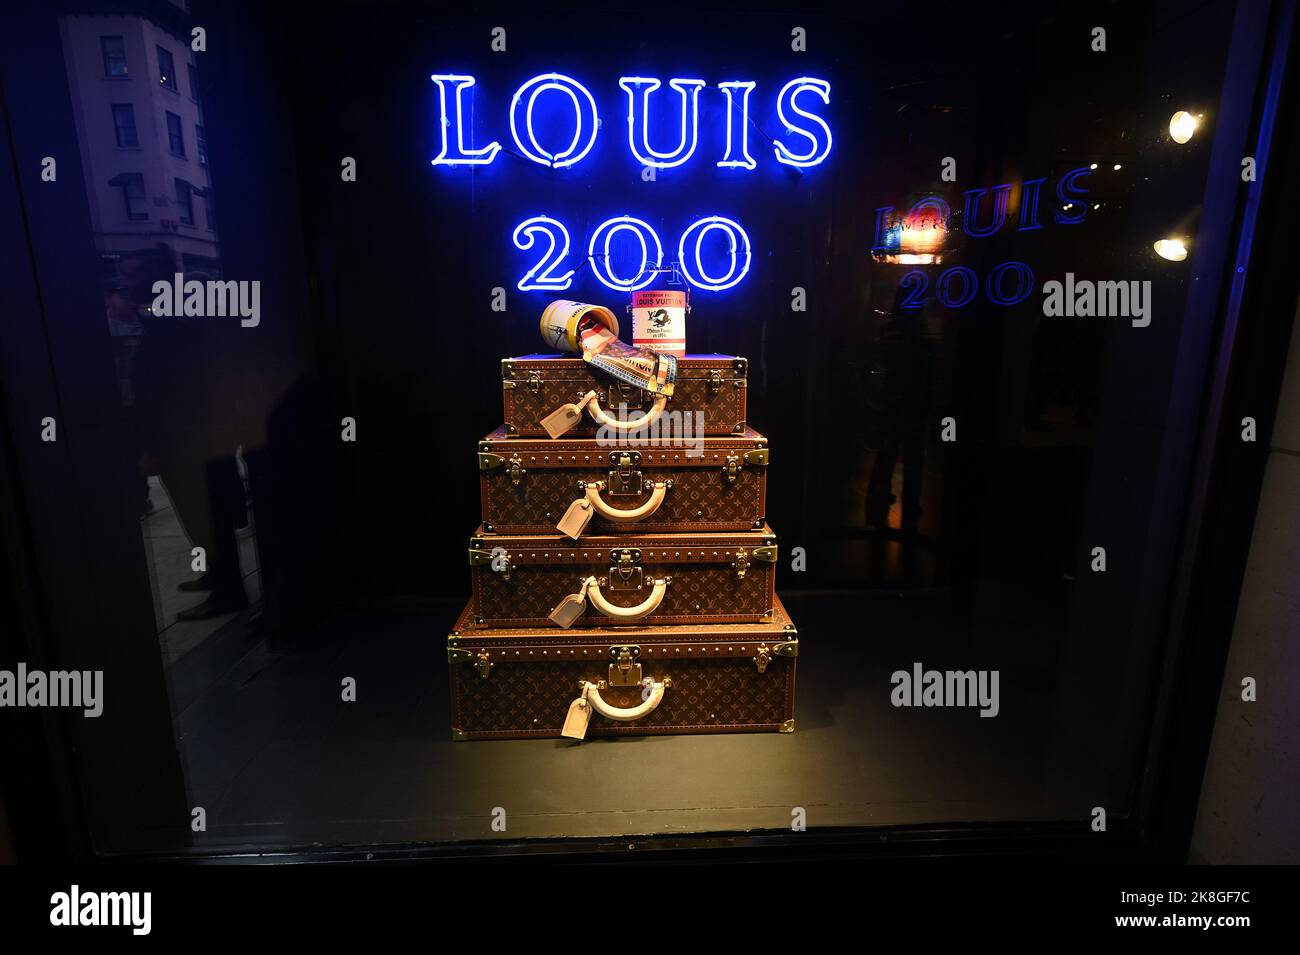 Visitors arrive at the Louis Vuitton's 200 Trunks, 200 Visionaries: The  Exhibition, New York, NY, October 23, 2022. The exhibition features art  installations and metaphorical transformations based on the iconic Louis  Vuitton